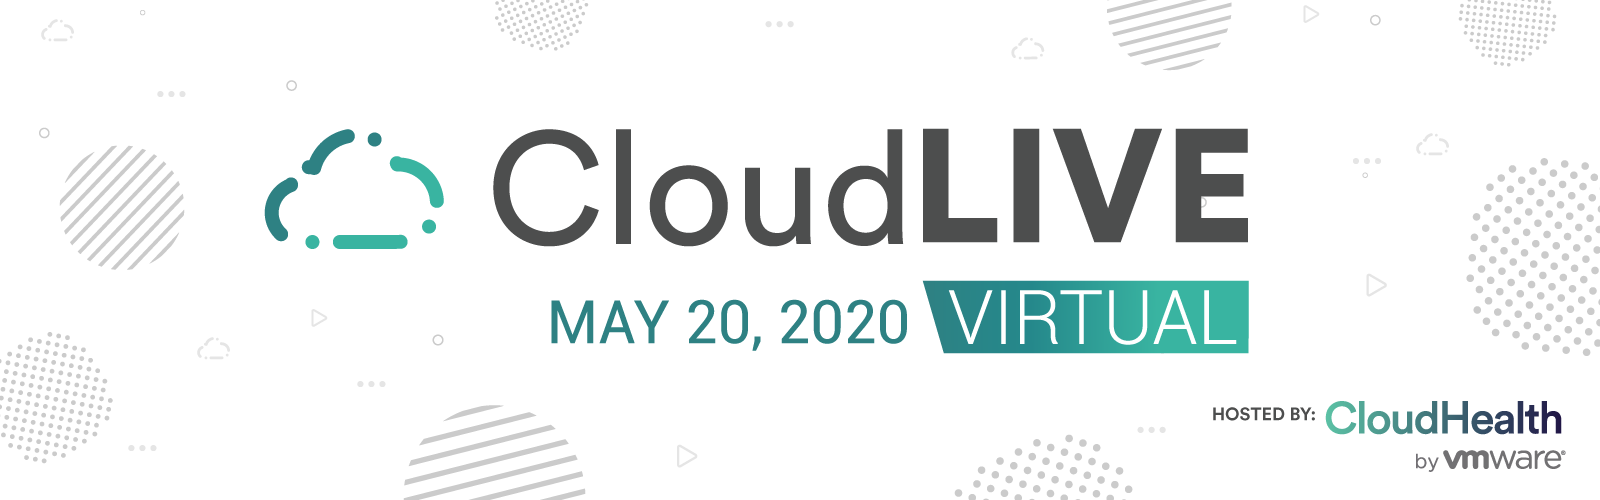 CloudLIVE Virtual May 20, 2020